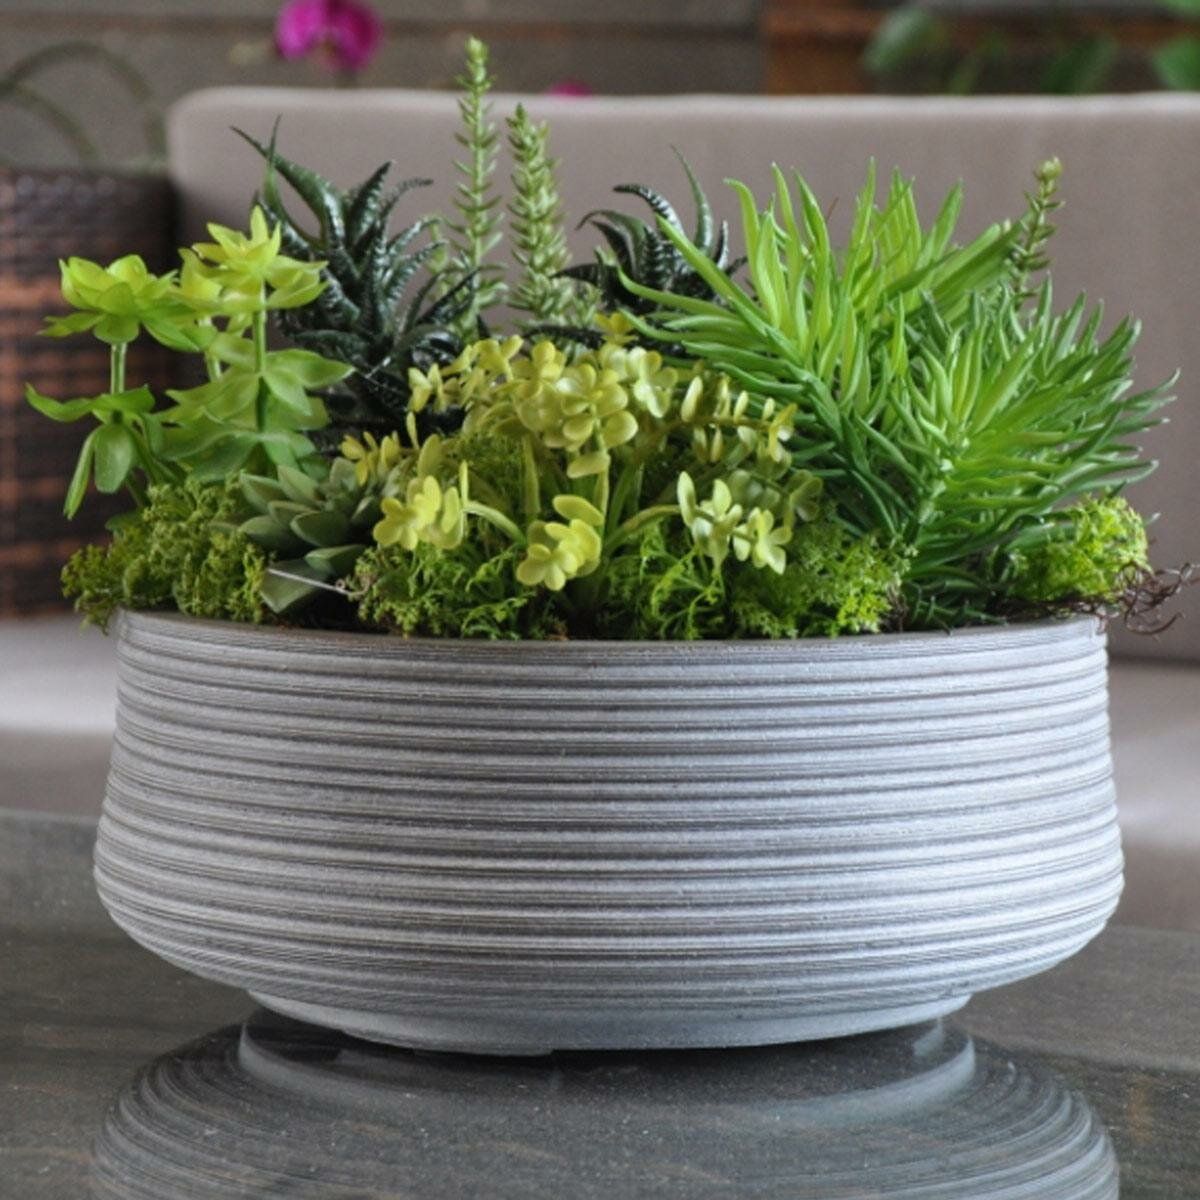 Best Outdoor Plant Pots For Garden, Large Outdoor Plant Pots With Drainage